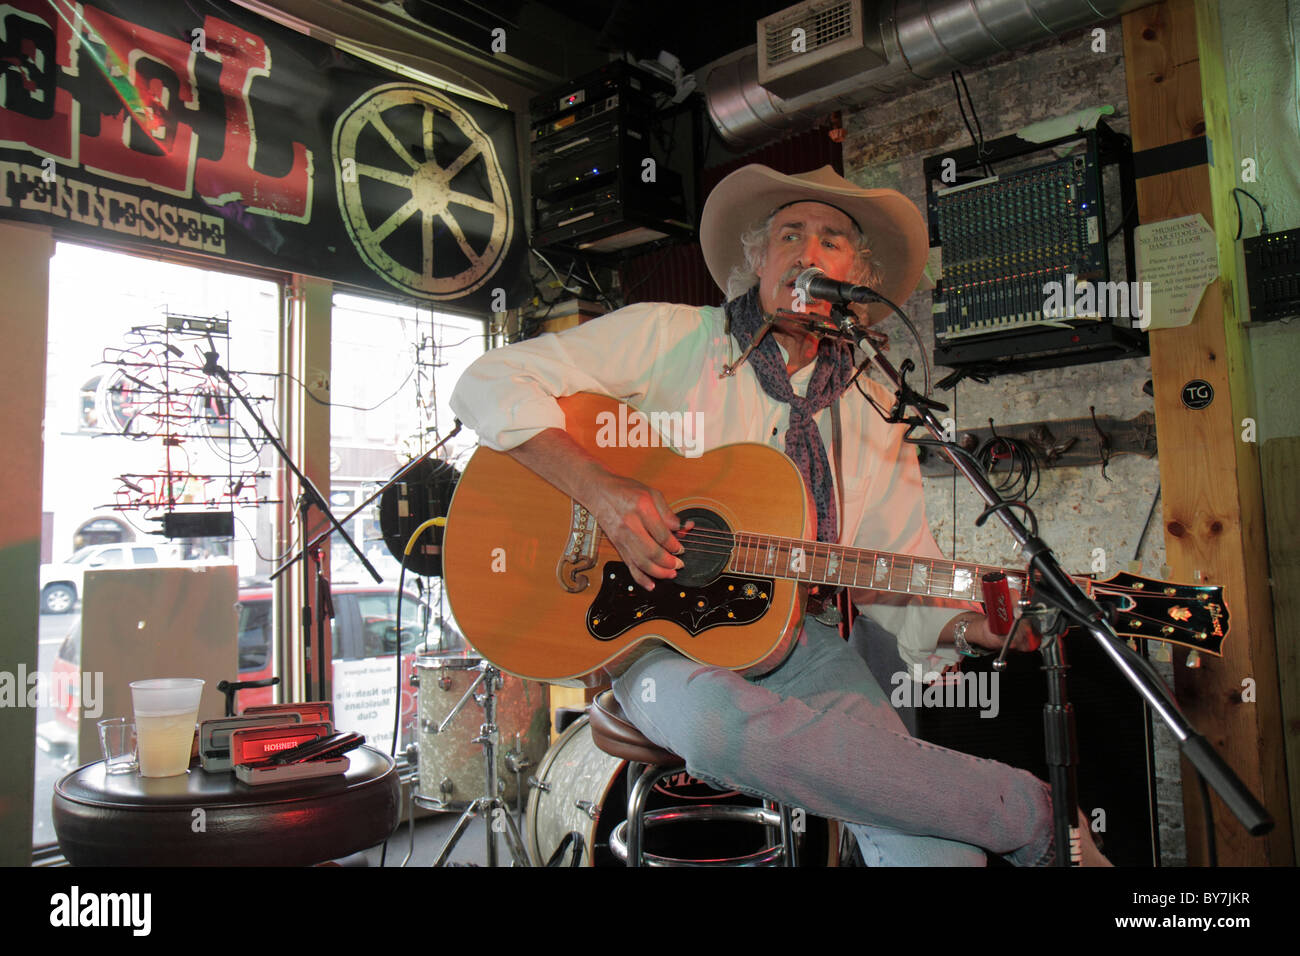 Nashville Tennessee,Music City USA,downtown,Lower Broadway,The Wheel,bar bars lounge pub,live entertainment,honky tonk,stage,musician,playing,sing,per Stock Photo